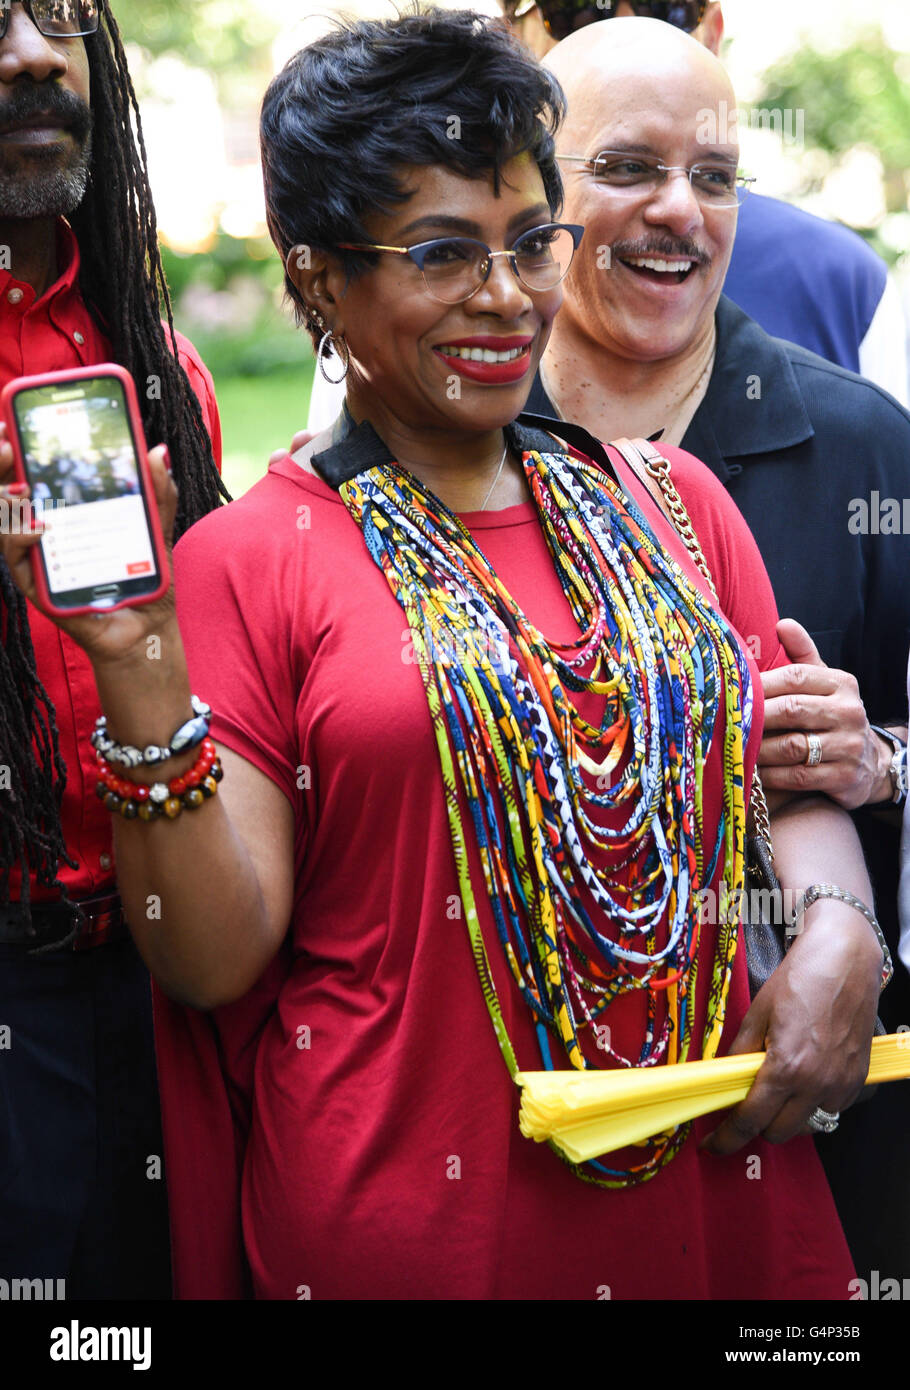 Philadelphia, Pennsylvania, USA. 18th June, 2016. Actress SHERYL LEE RALPH and her husband State Senator, VINCENT HUGHES at the Juneteenth Celebration in Philadelphia Pa Juneteenth is the oldest known celebration commemorating the ending of slavery in the United States © Ricky Fitchett/ZUMA Wire/Alamy Live News Stock Photo